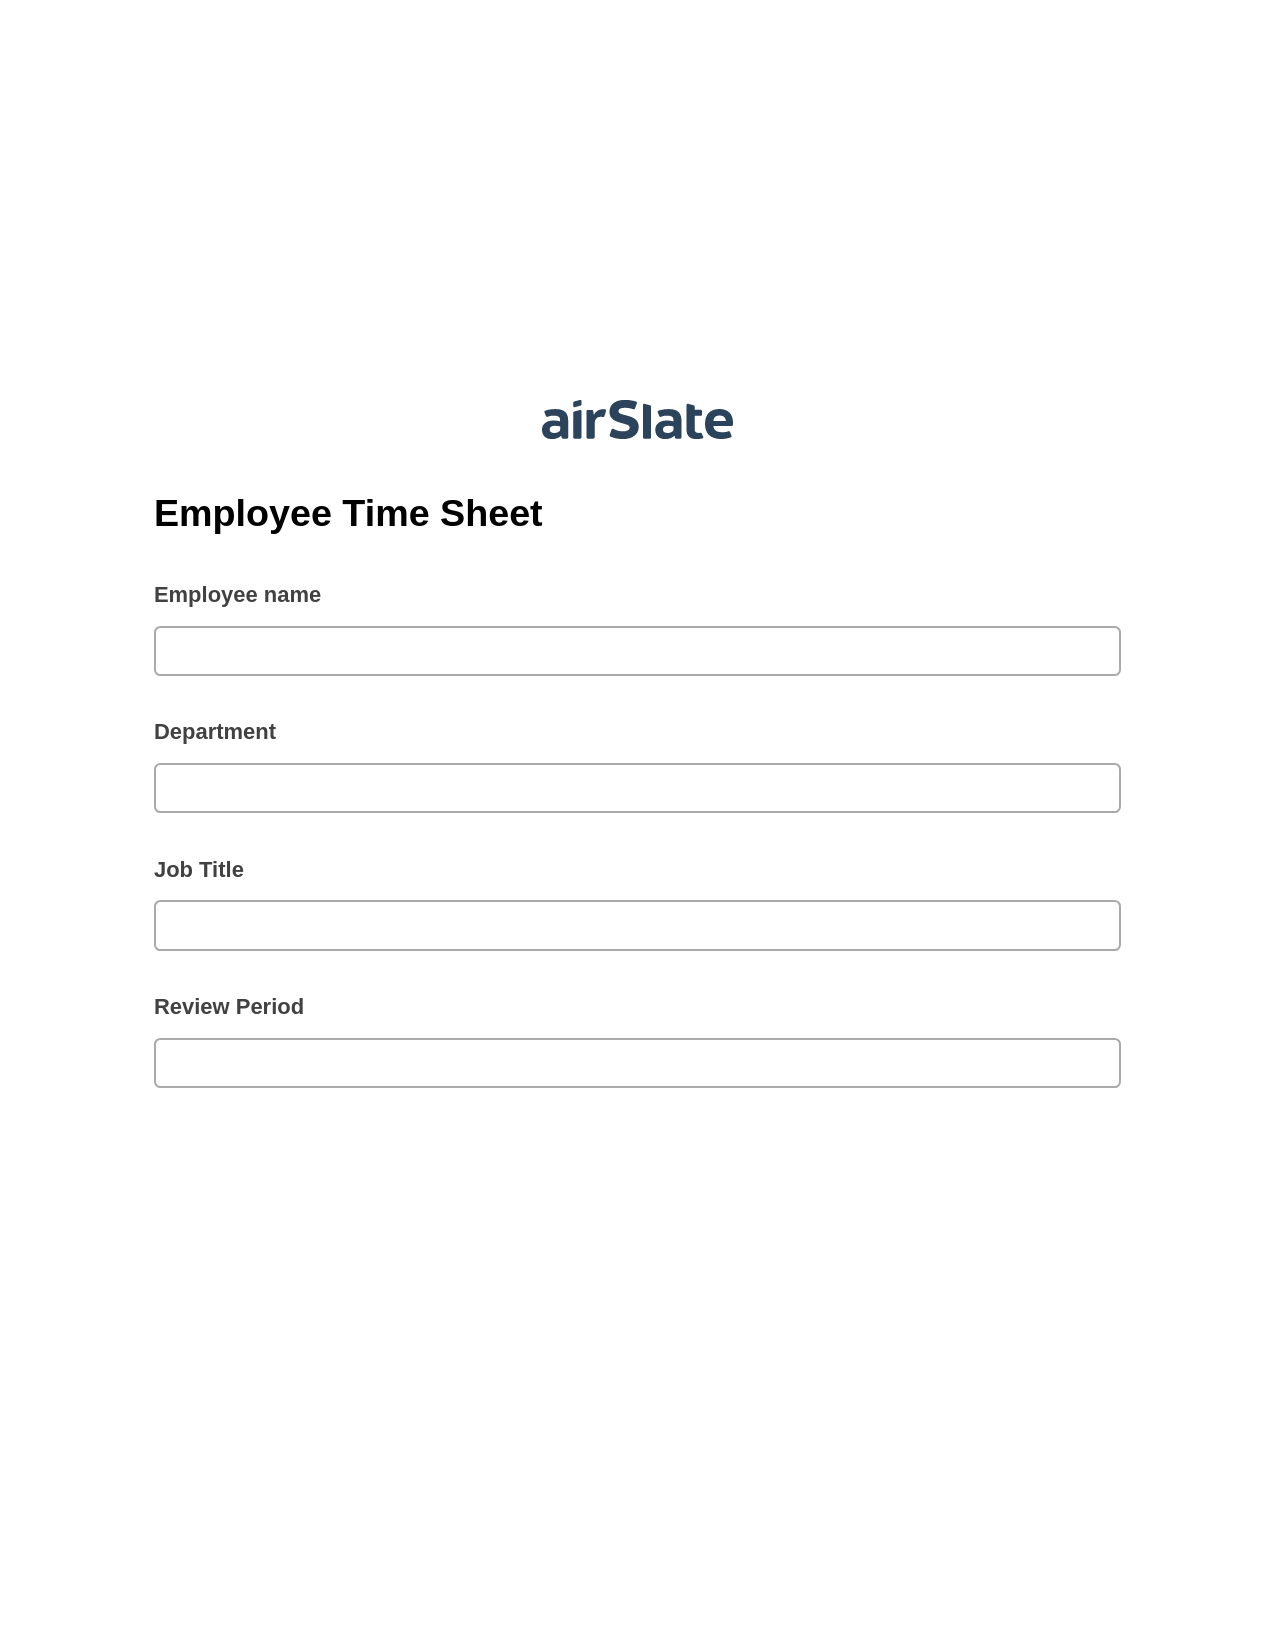 Employee Time Sheet Pre-fill from MS Dynamics 365 Records, Create Salesforce Records Bot, Slack Two-Way Binding Bot